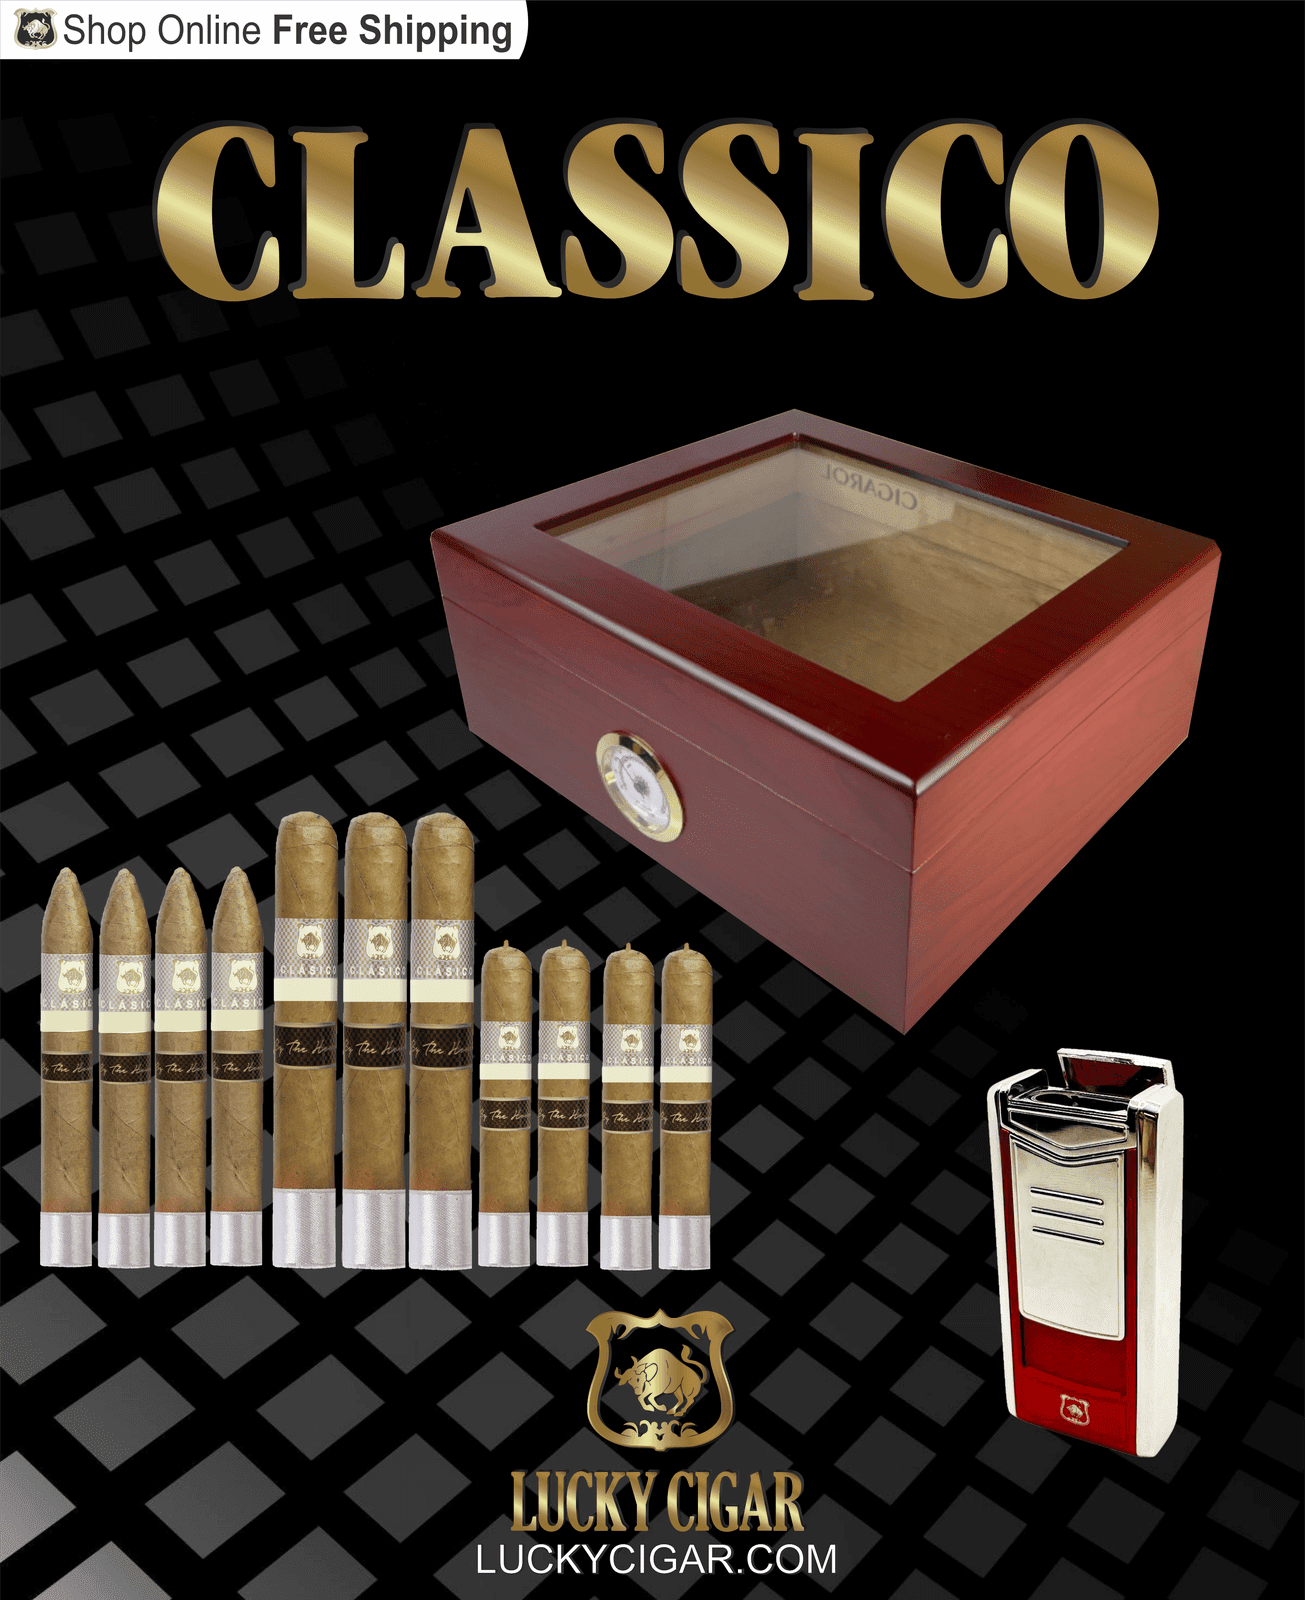 Lucky Cigar Sampler Sets: Set of 11 Classico Cigars with Torch, Desk Humidor